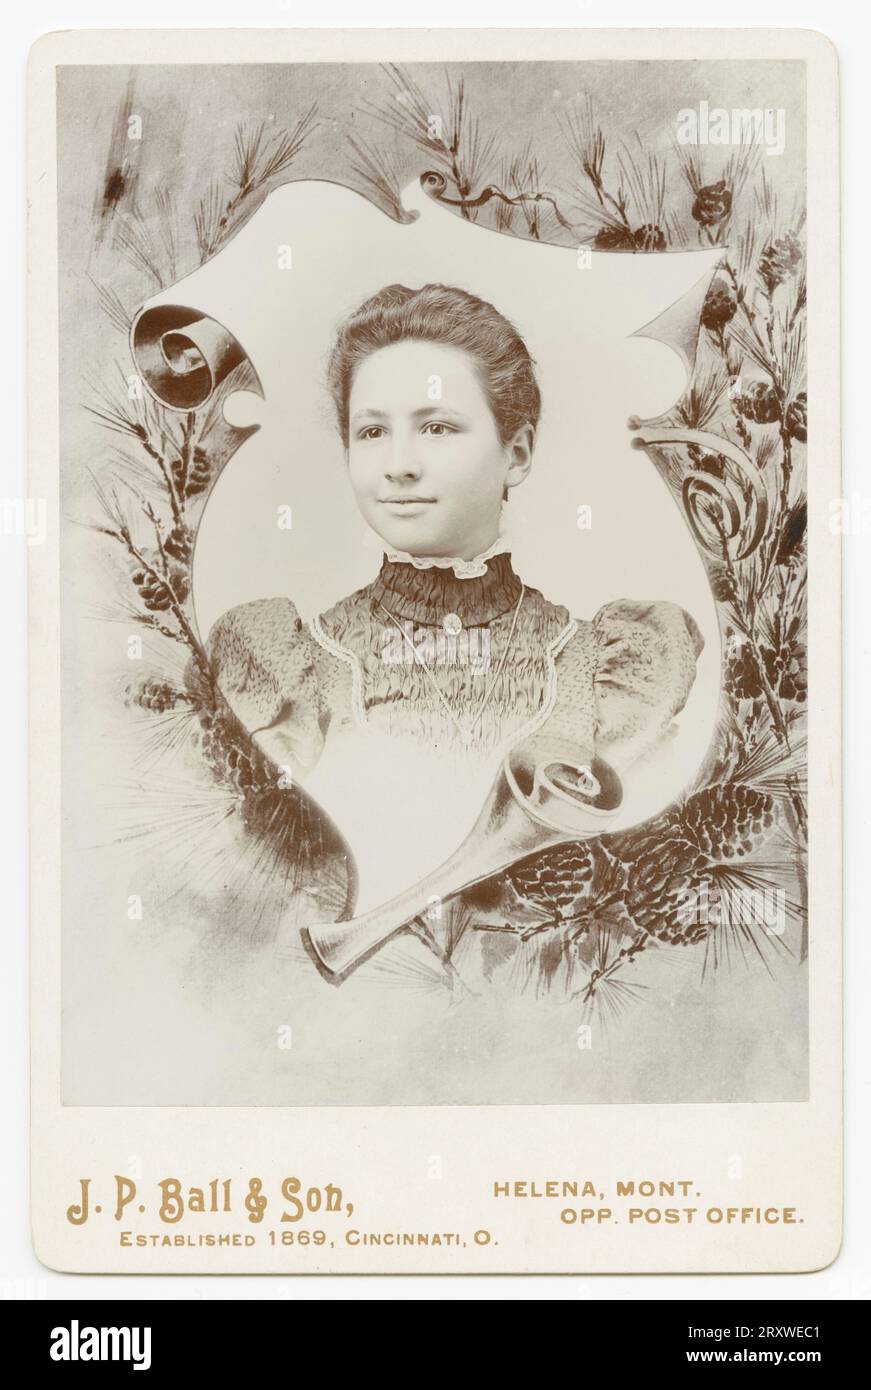 A black-and-white photograph of a woman photographed at the J. P. Ball & Son studio in Helena, MT. The photo is mounted on a light colored cabinet card with the name and location of the photo studio printed on the front along the bottom. The portrait is surrounded by a decorative border of curling scroll paper and pine tree branches. The girl is wearing a patterned dress with ruffled collar and locket. She has dark hair that is pinned back. There is an inscription in pencil on the back of the card. Stock Photo